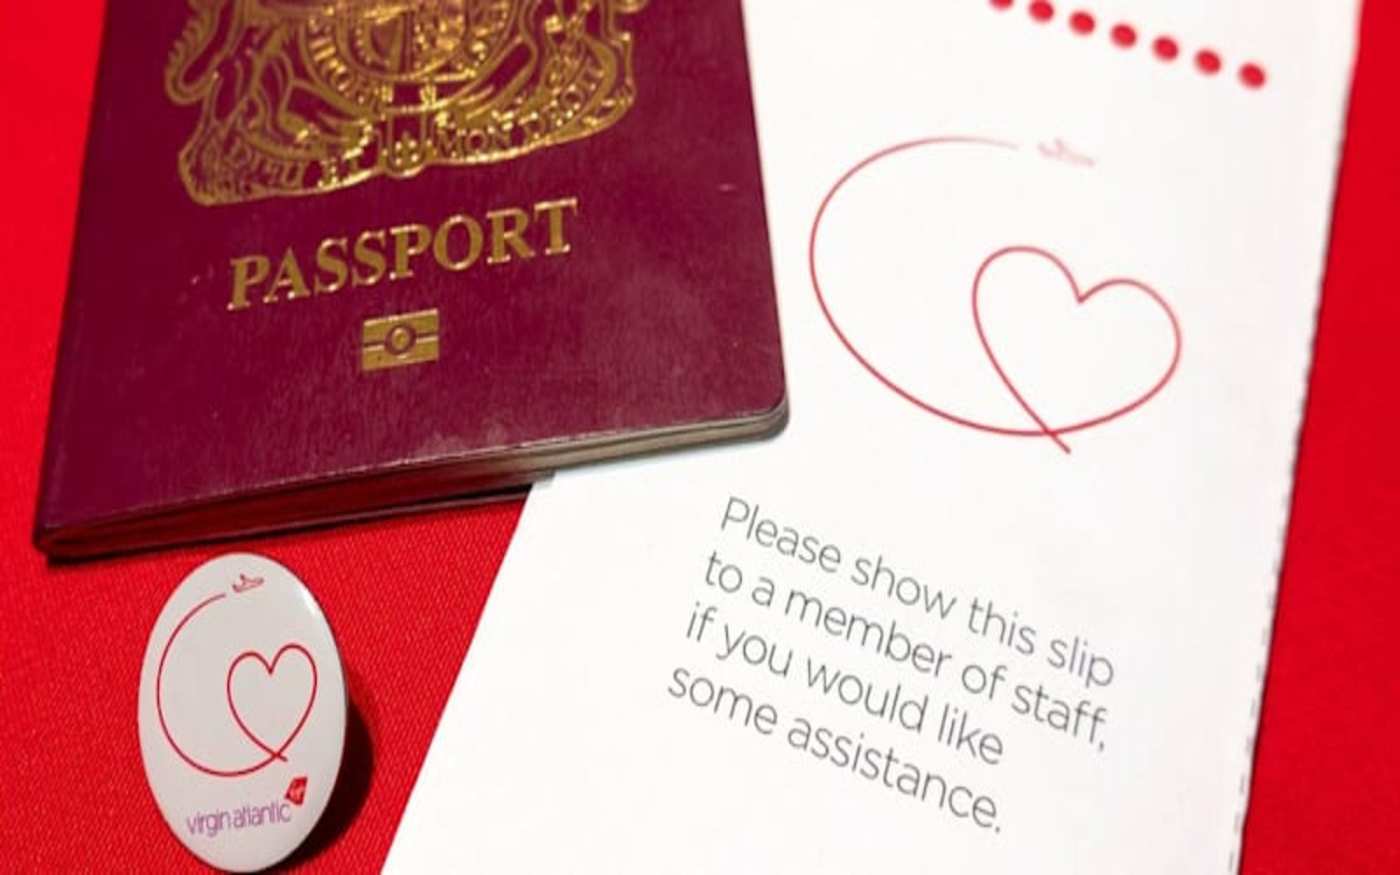 A UK passport with a badge and slip passengers show Virgin Atlantic cabin crew if they require assistance